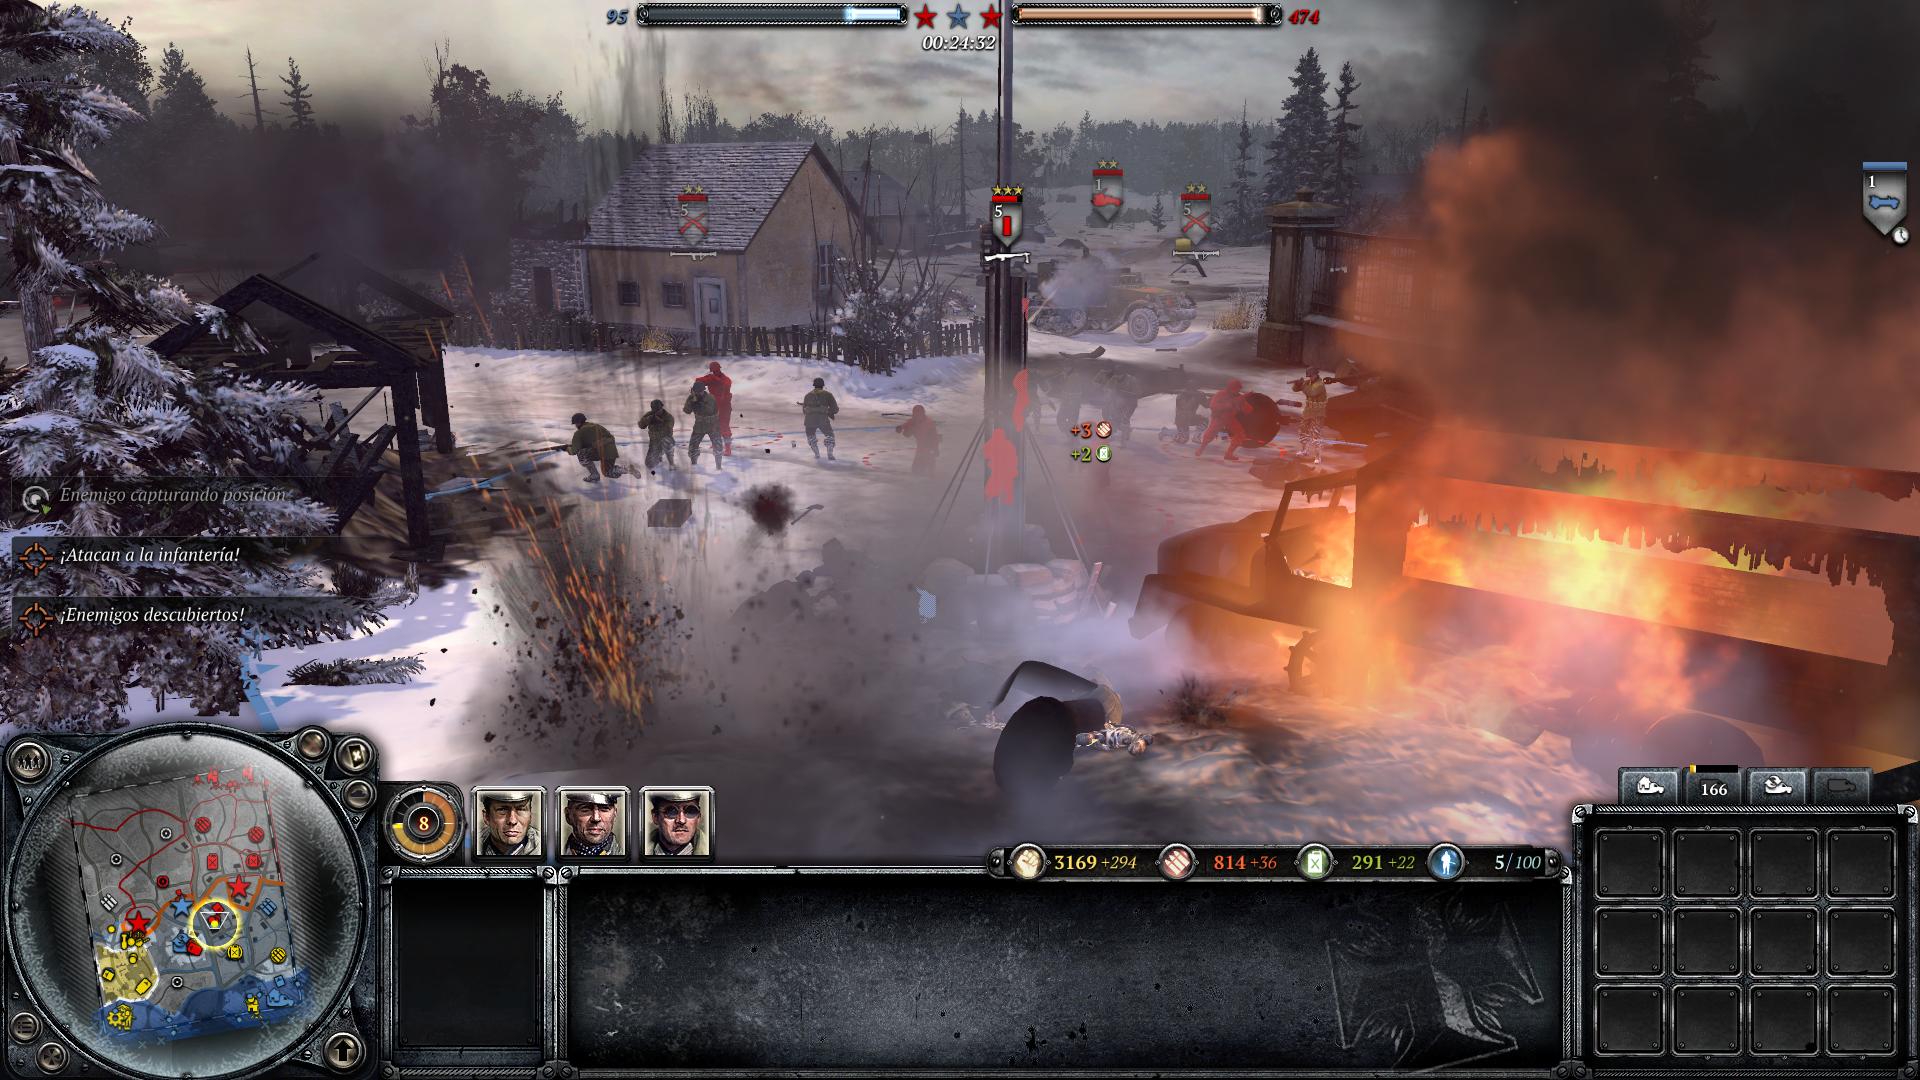 download company of heroes 2 the western front armies